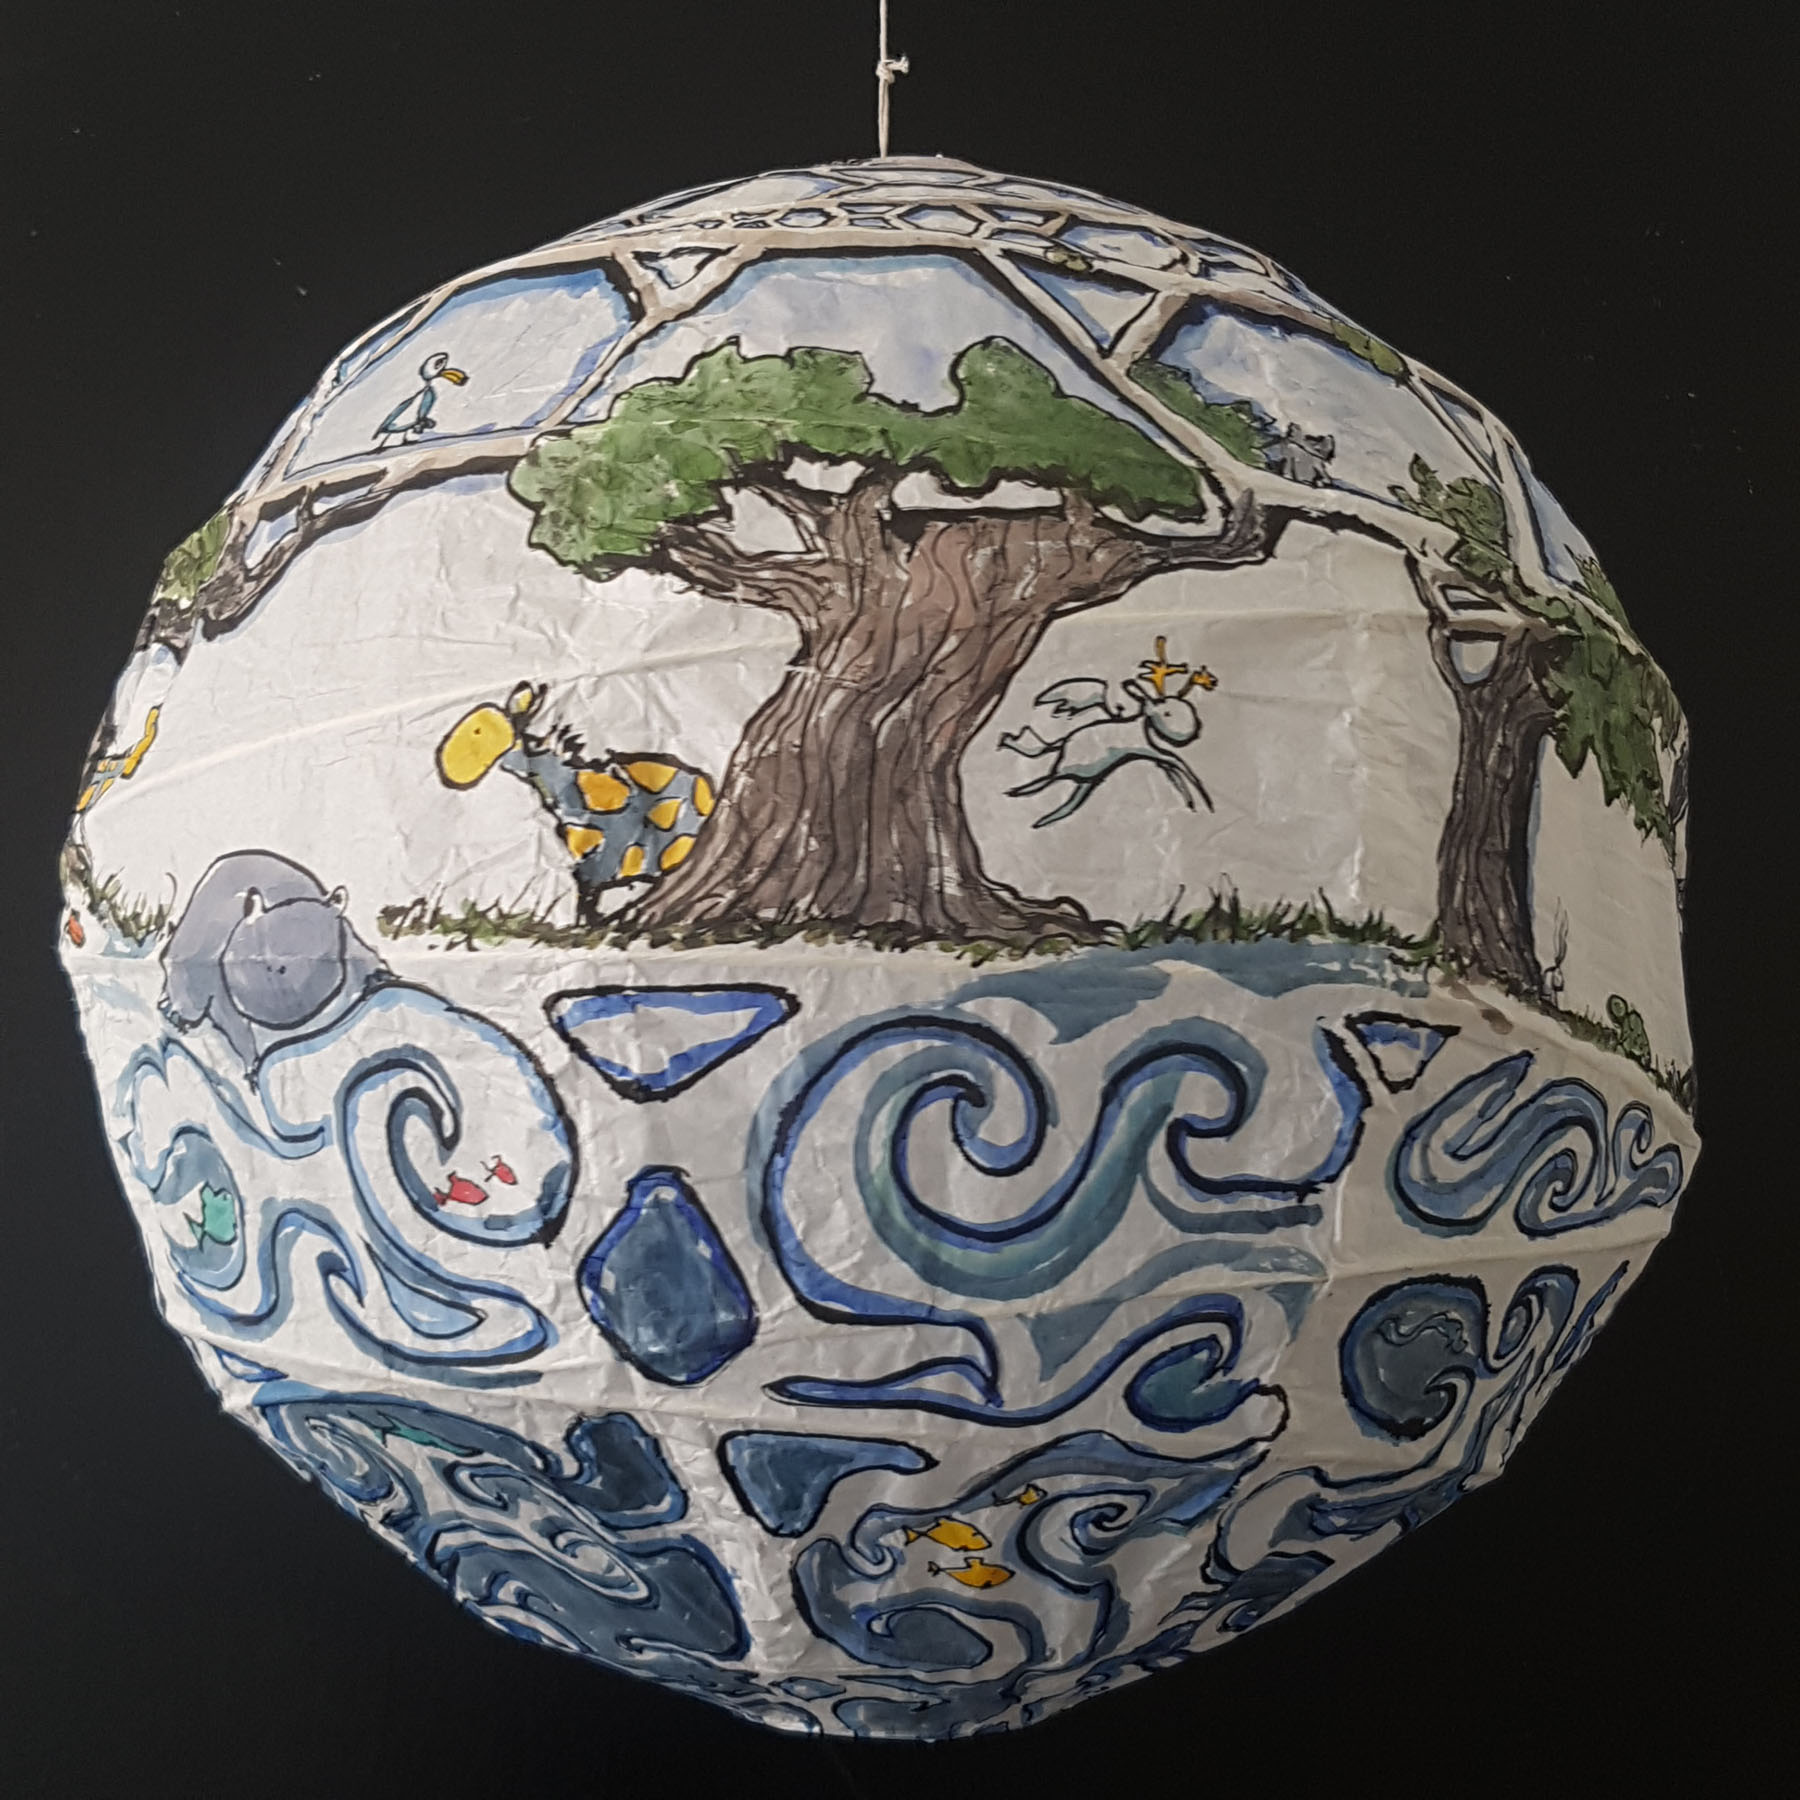 Painting of sphere house by Frits Ahlefeldt, on Rice paper lamp